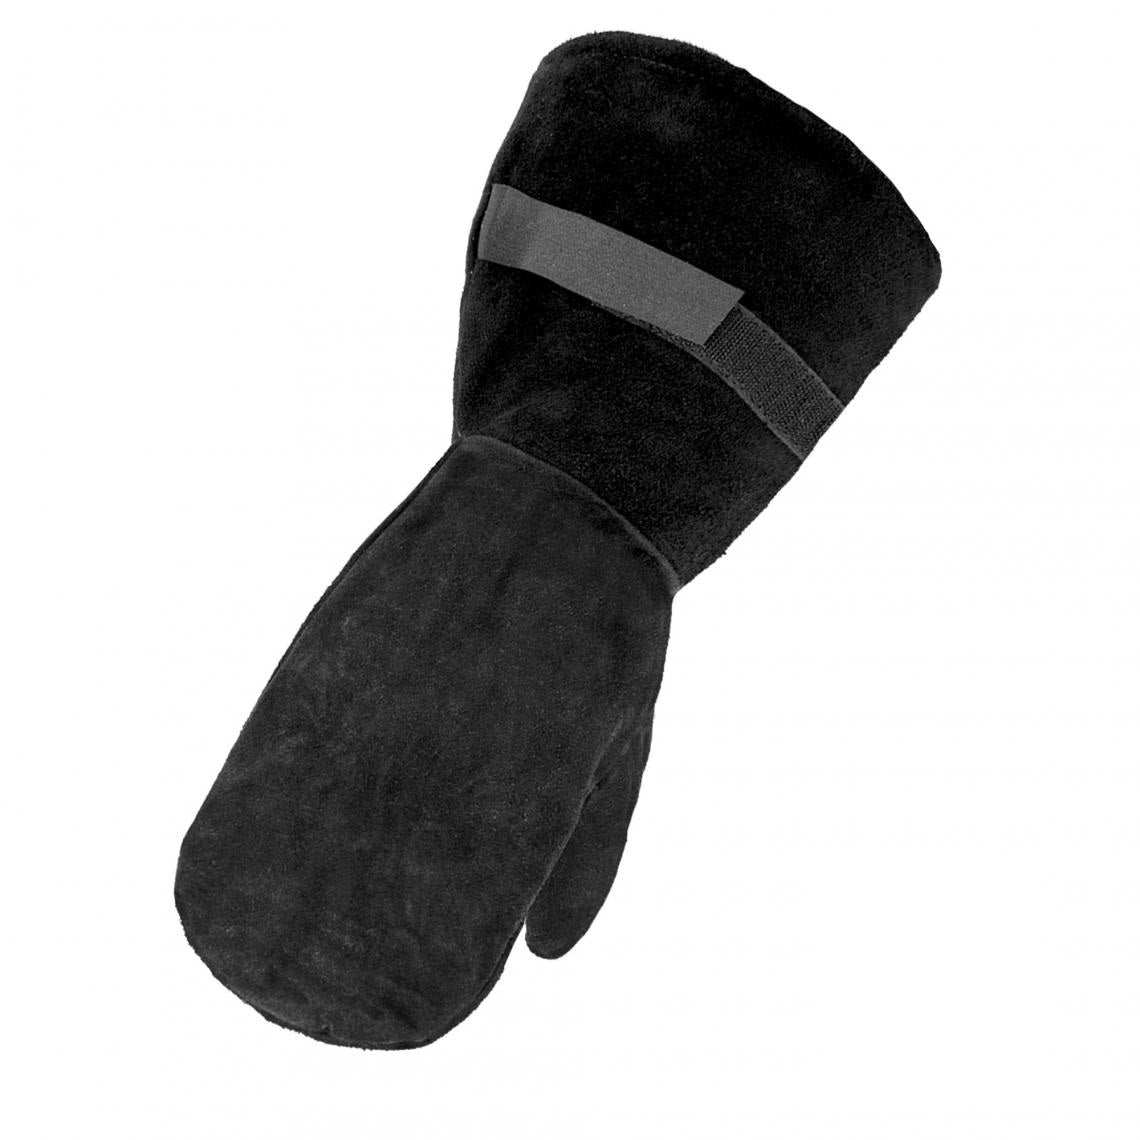 Horizon Pile Lined Split Leather Gauntlet Mitts Work Gloves and Hats - Cleanflow